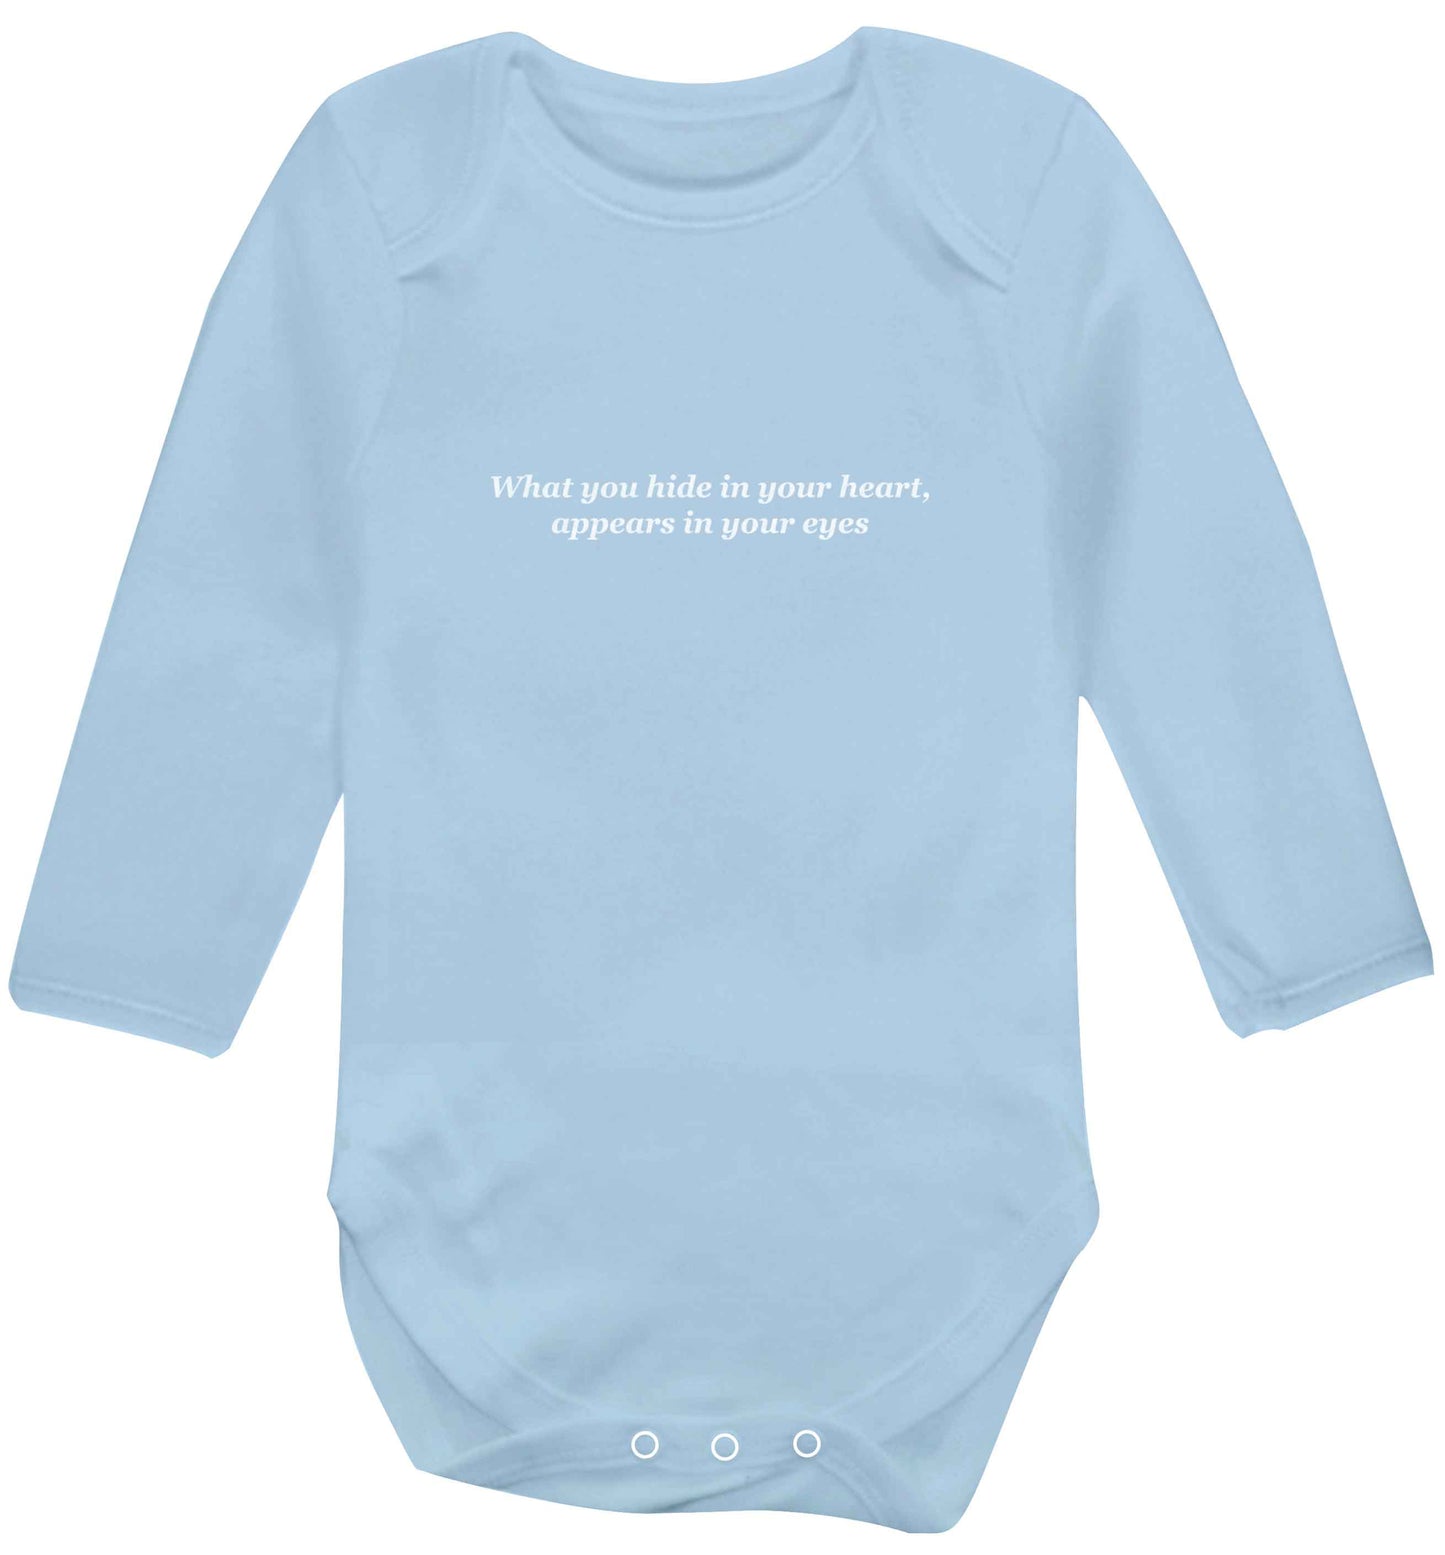 What you hide in your heart, appears in your eyes baby vest long sleeved pale blue 6-12 months